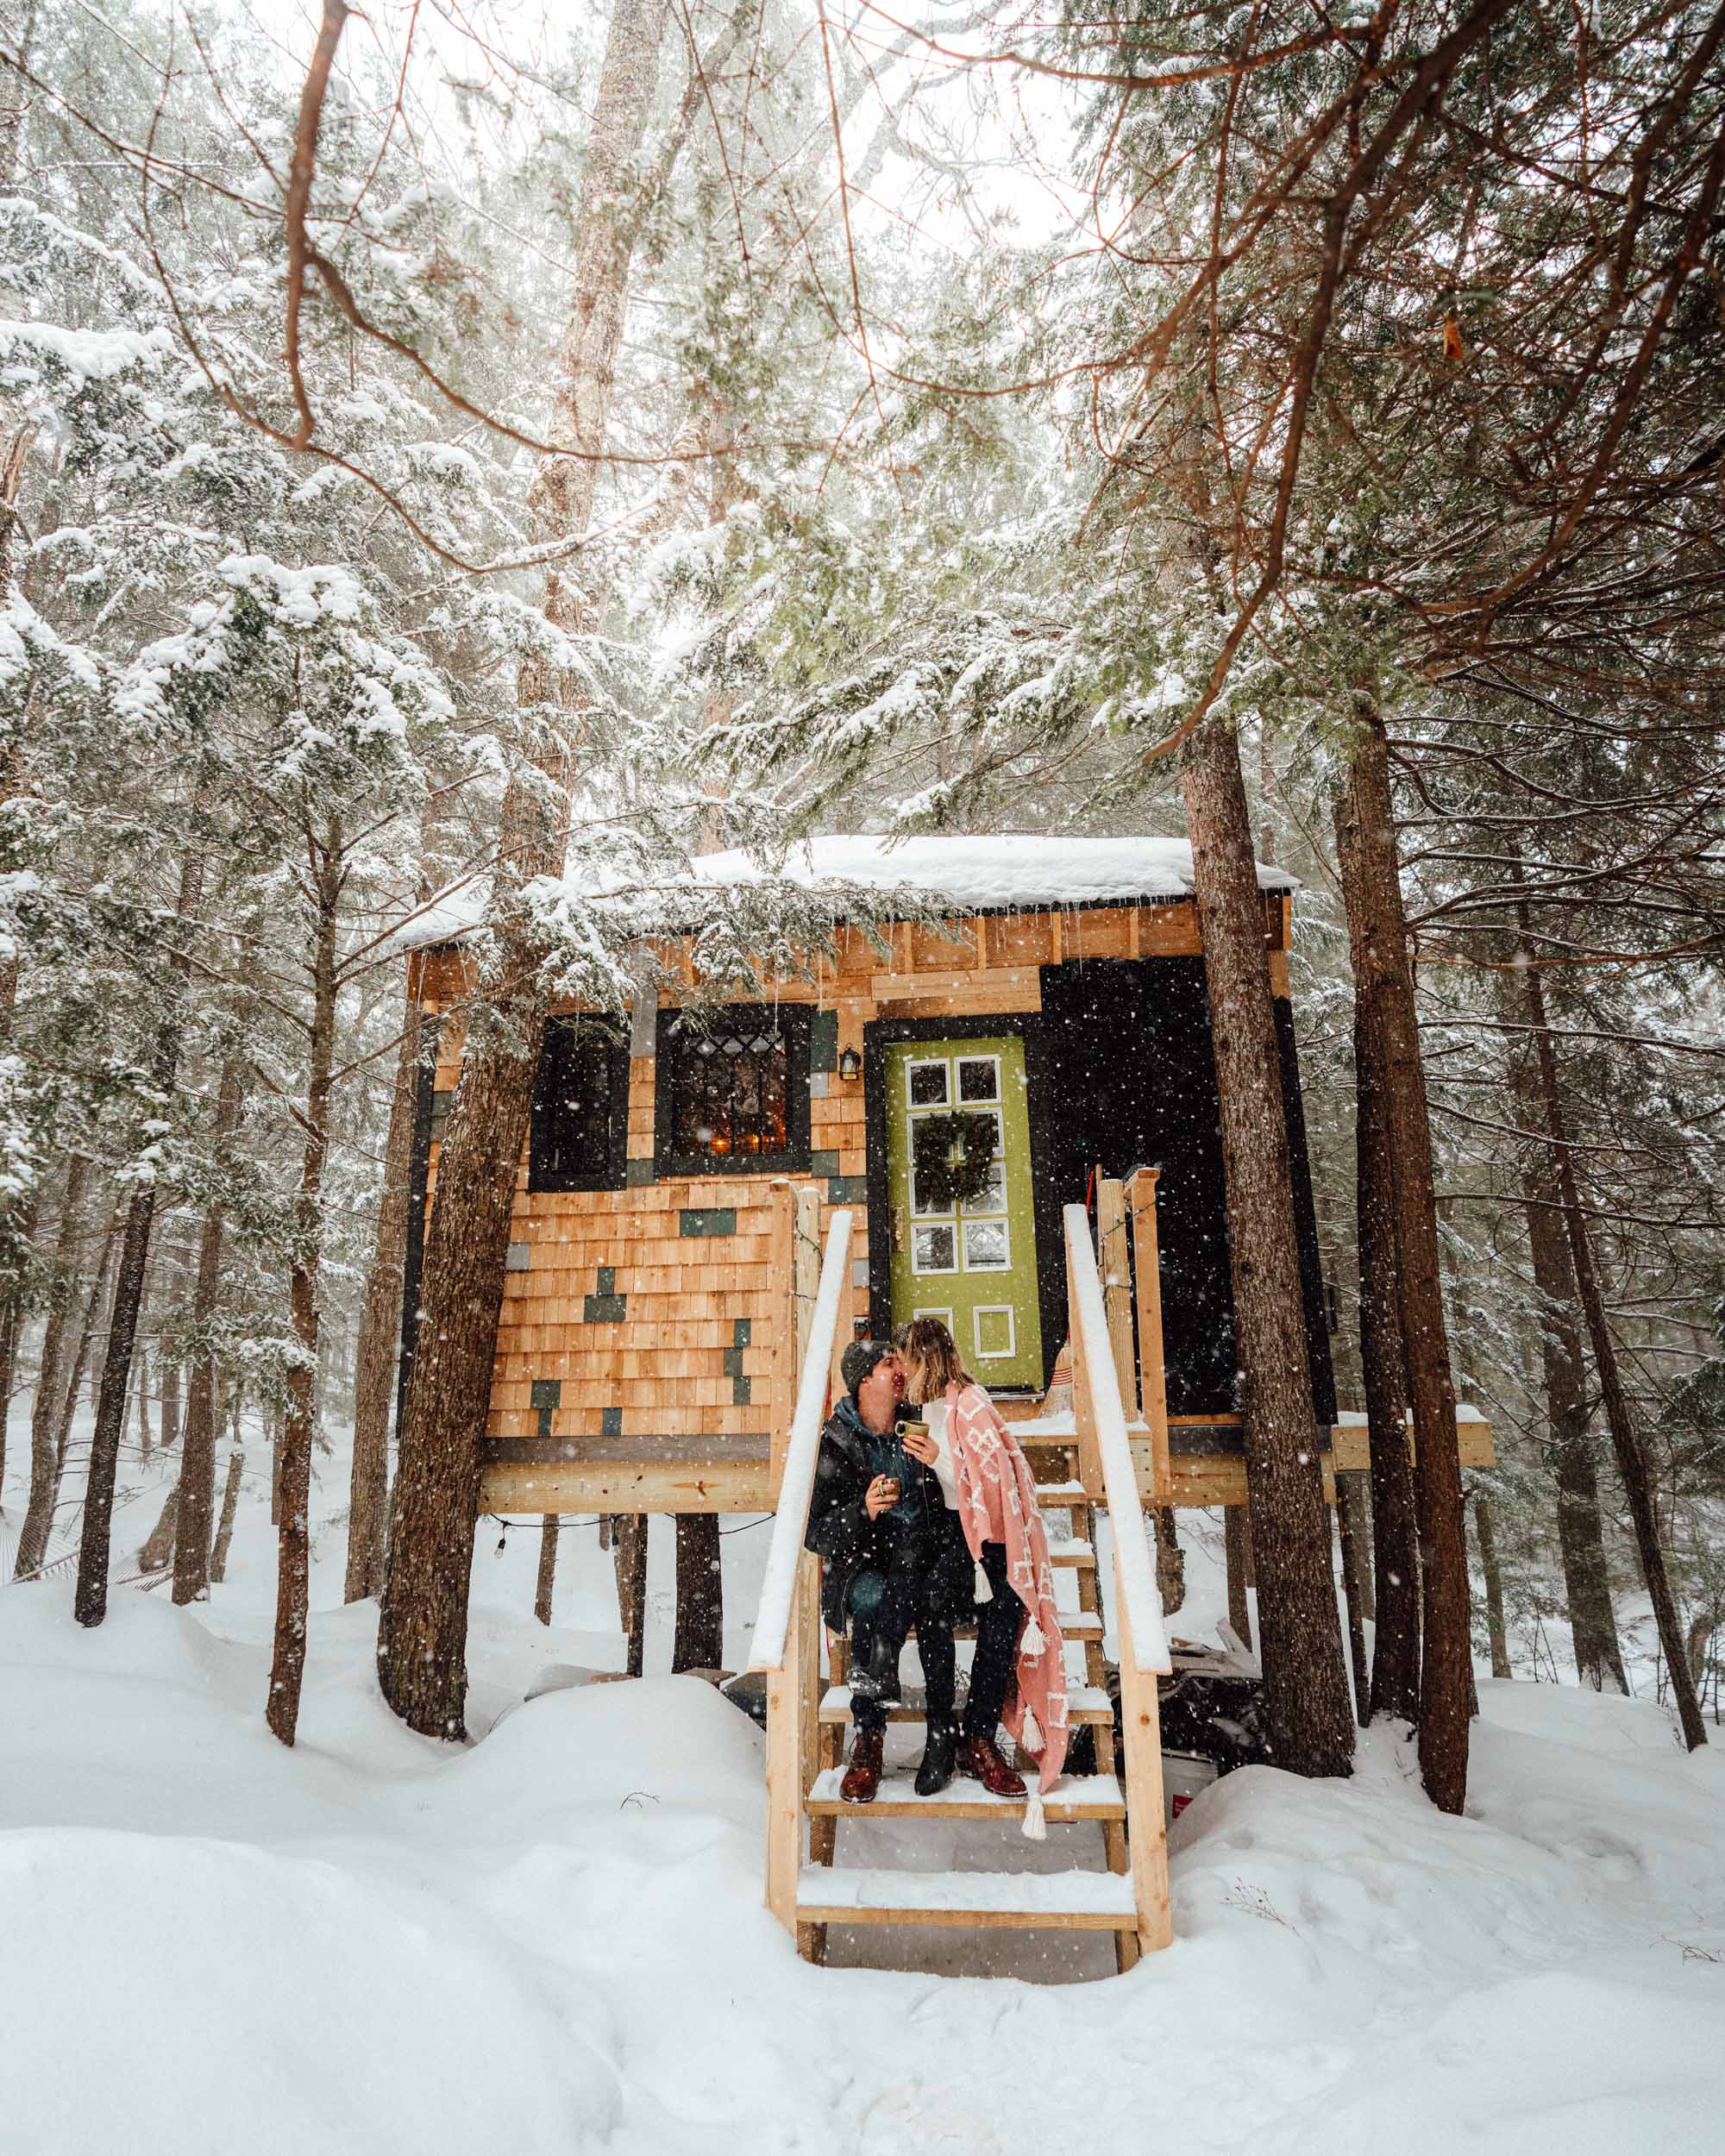 Vermont Treehouse Airbnb in the trees in winter via Find Us Lost